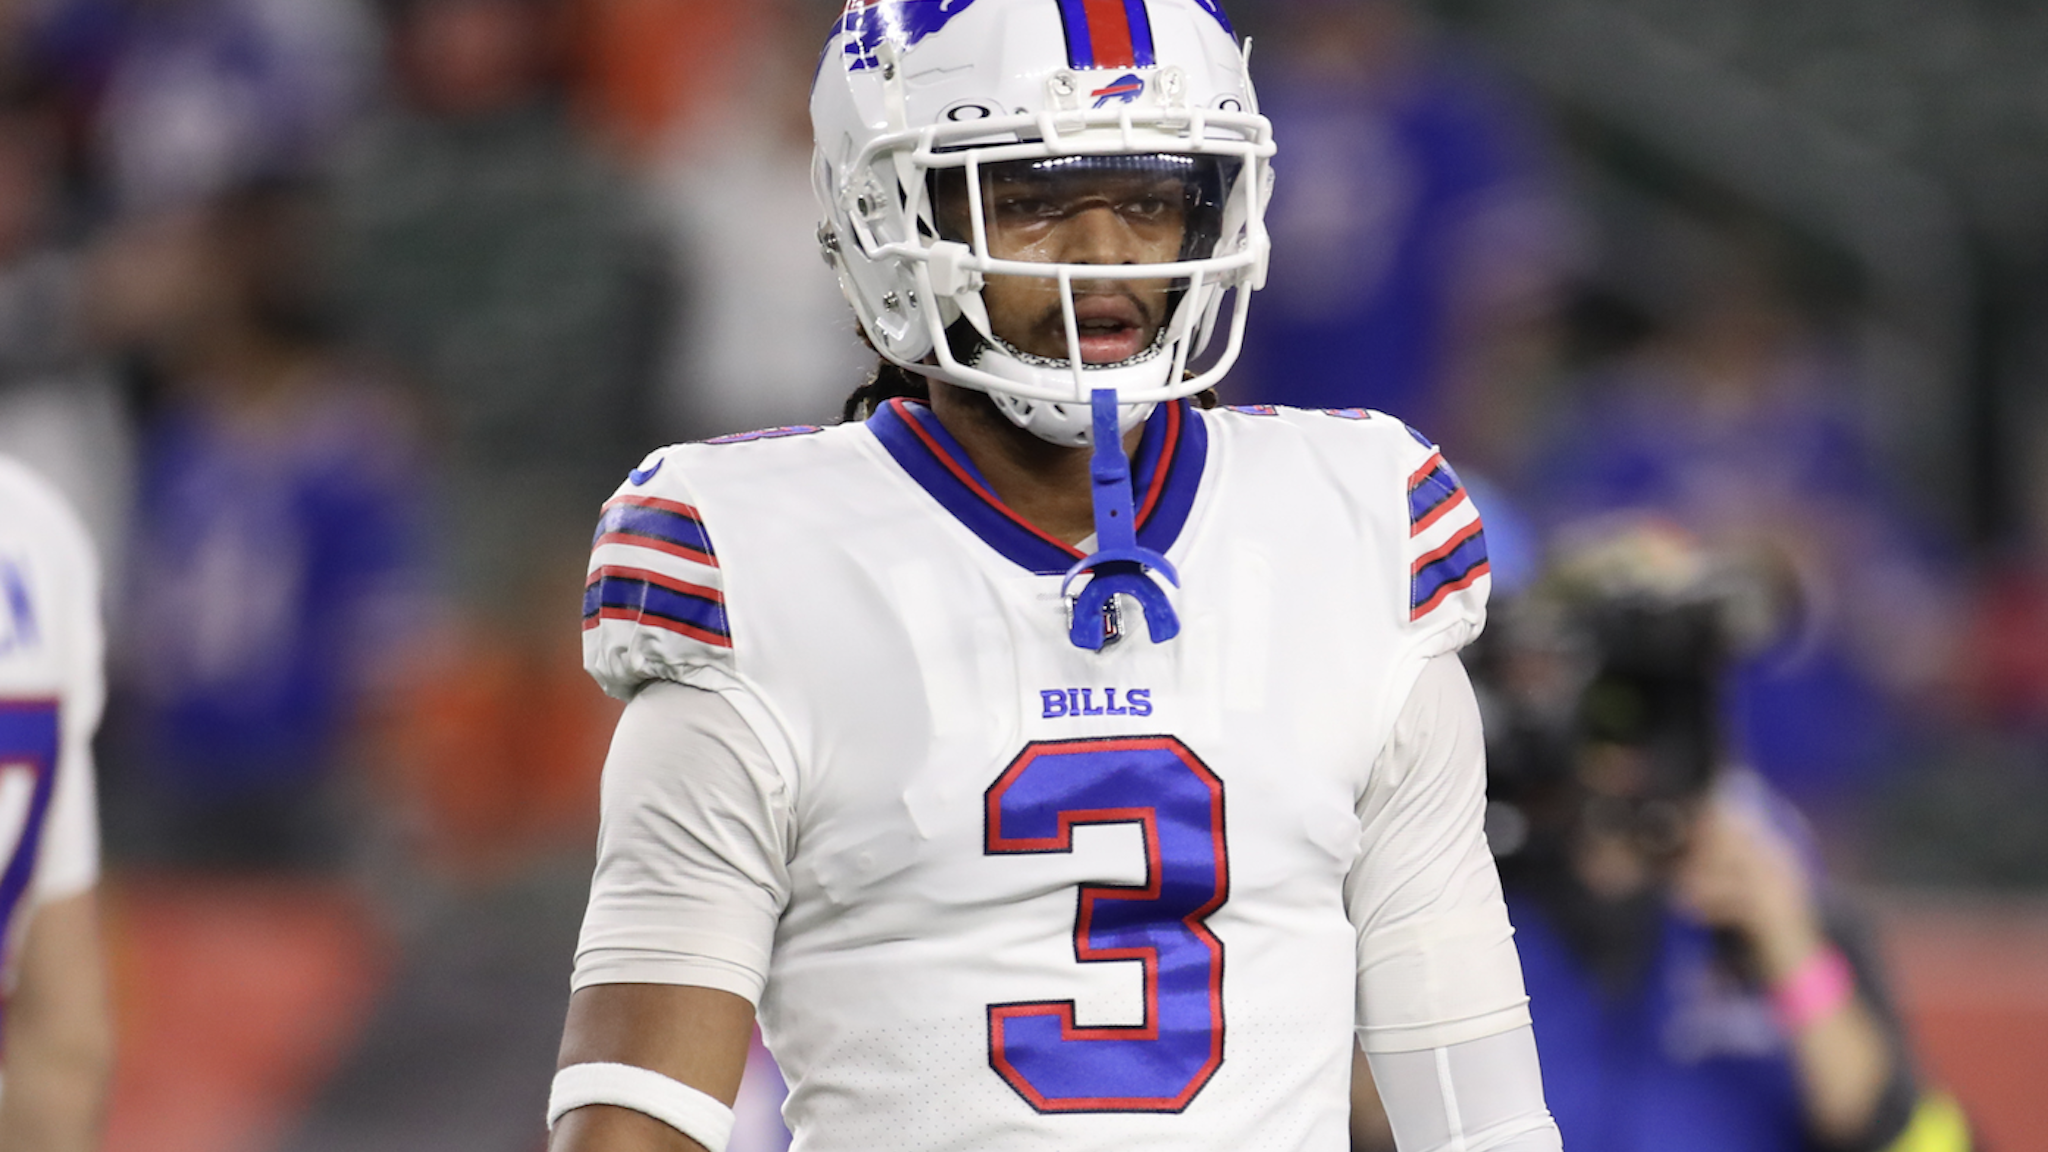 Buffalo Bills safety Damar Hamlin, who went into cardiac arrest in a frightening scene during Monday night’s contest against the Cincinnati Bengals, has shown dramatic improvement and appears to be “neurologically intact,” the team said in a Thursday statement.